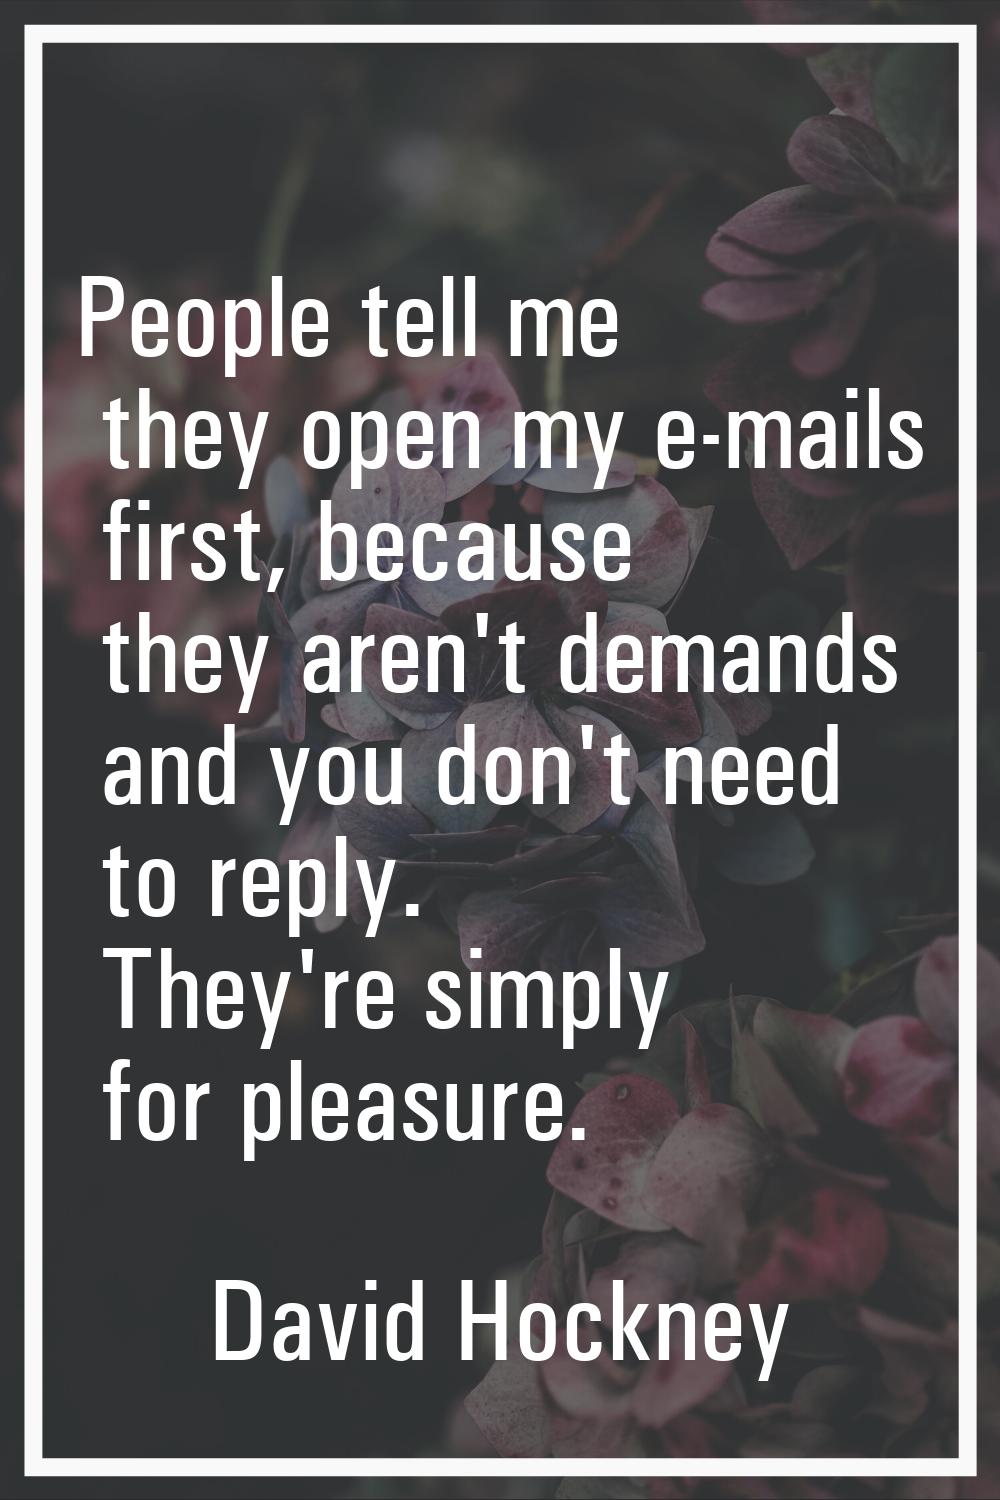 People tell me they open my e-mails first, because they aren't demands and you don't need to reply.